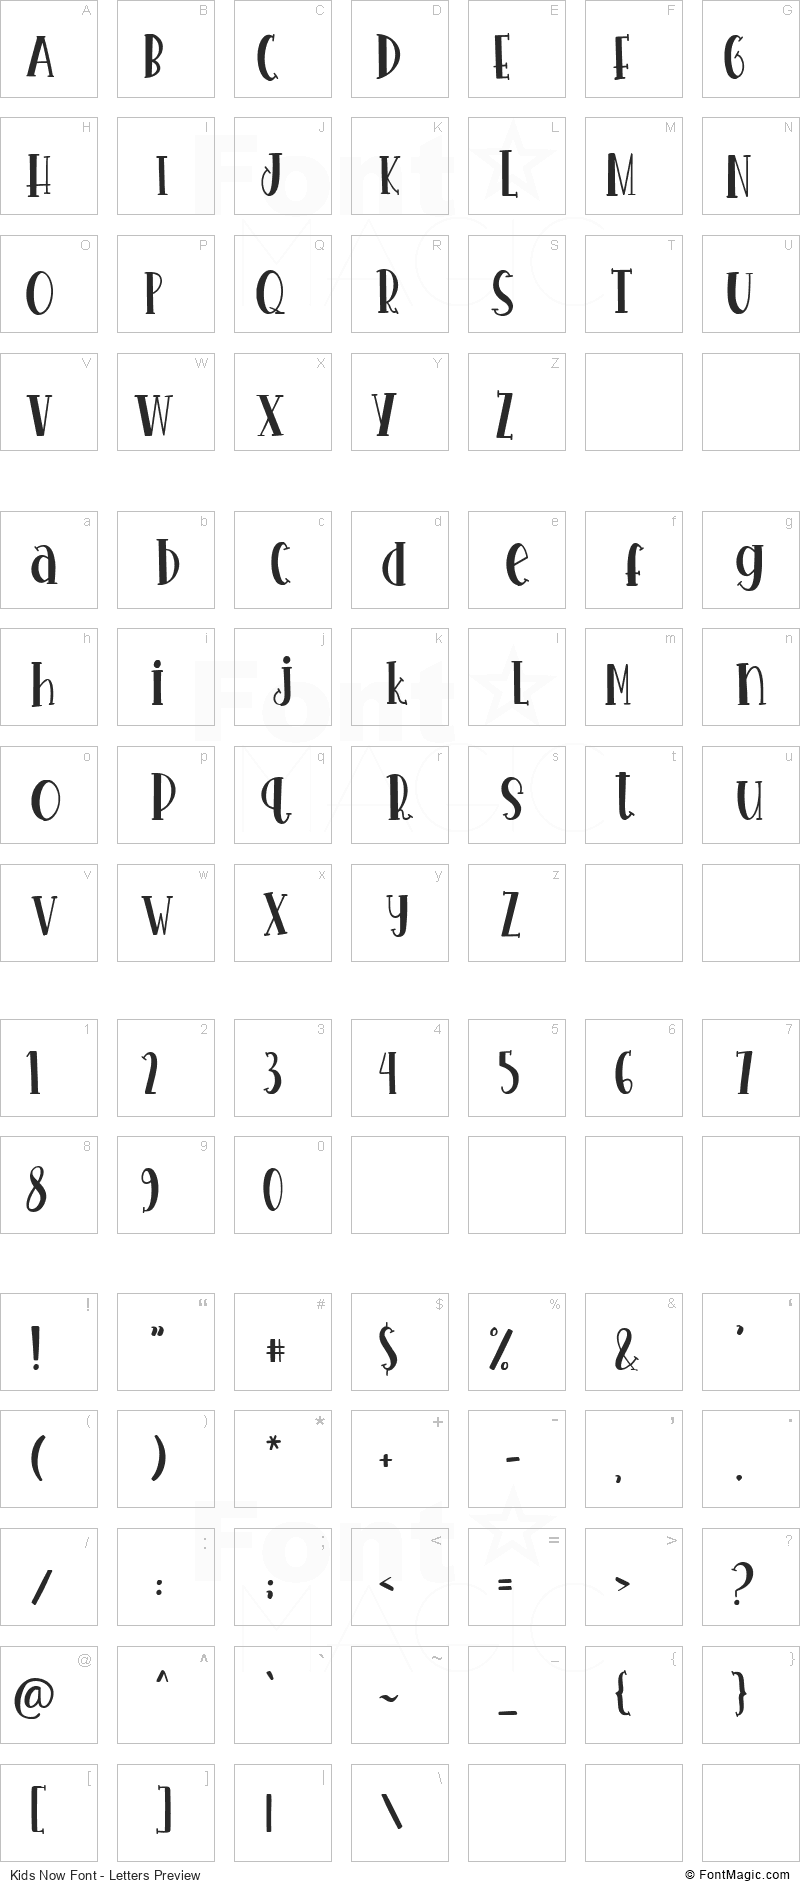 Kids Now Font - All Latters Preview Chart